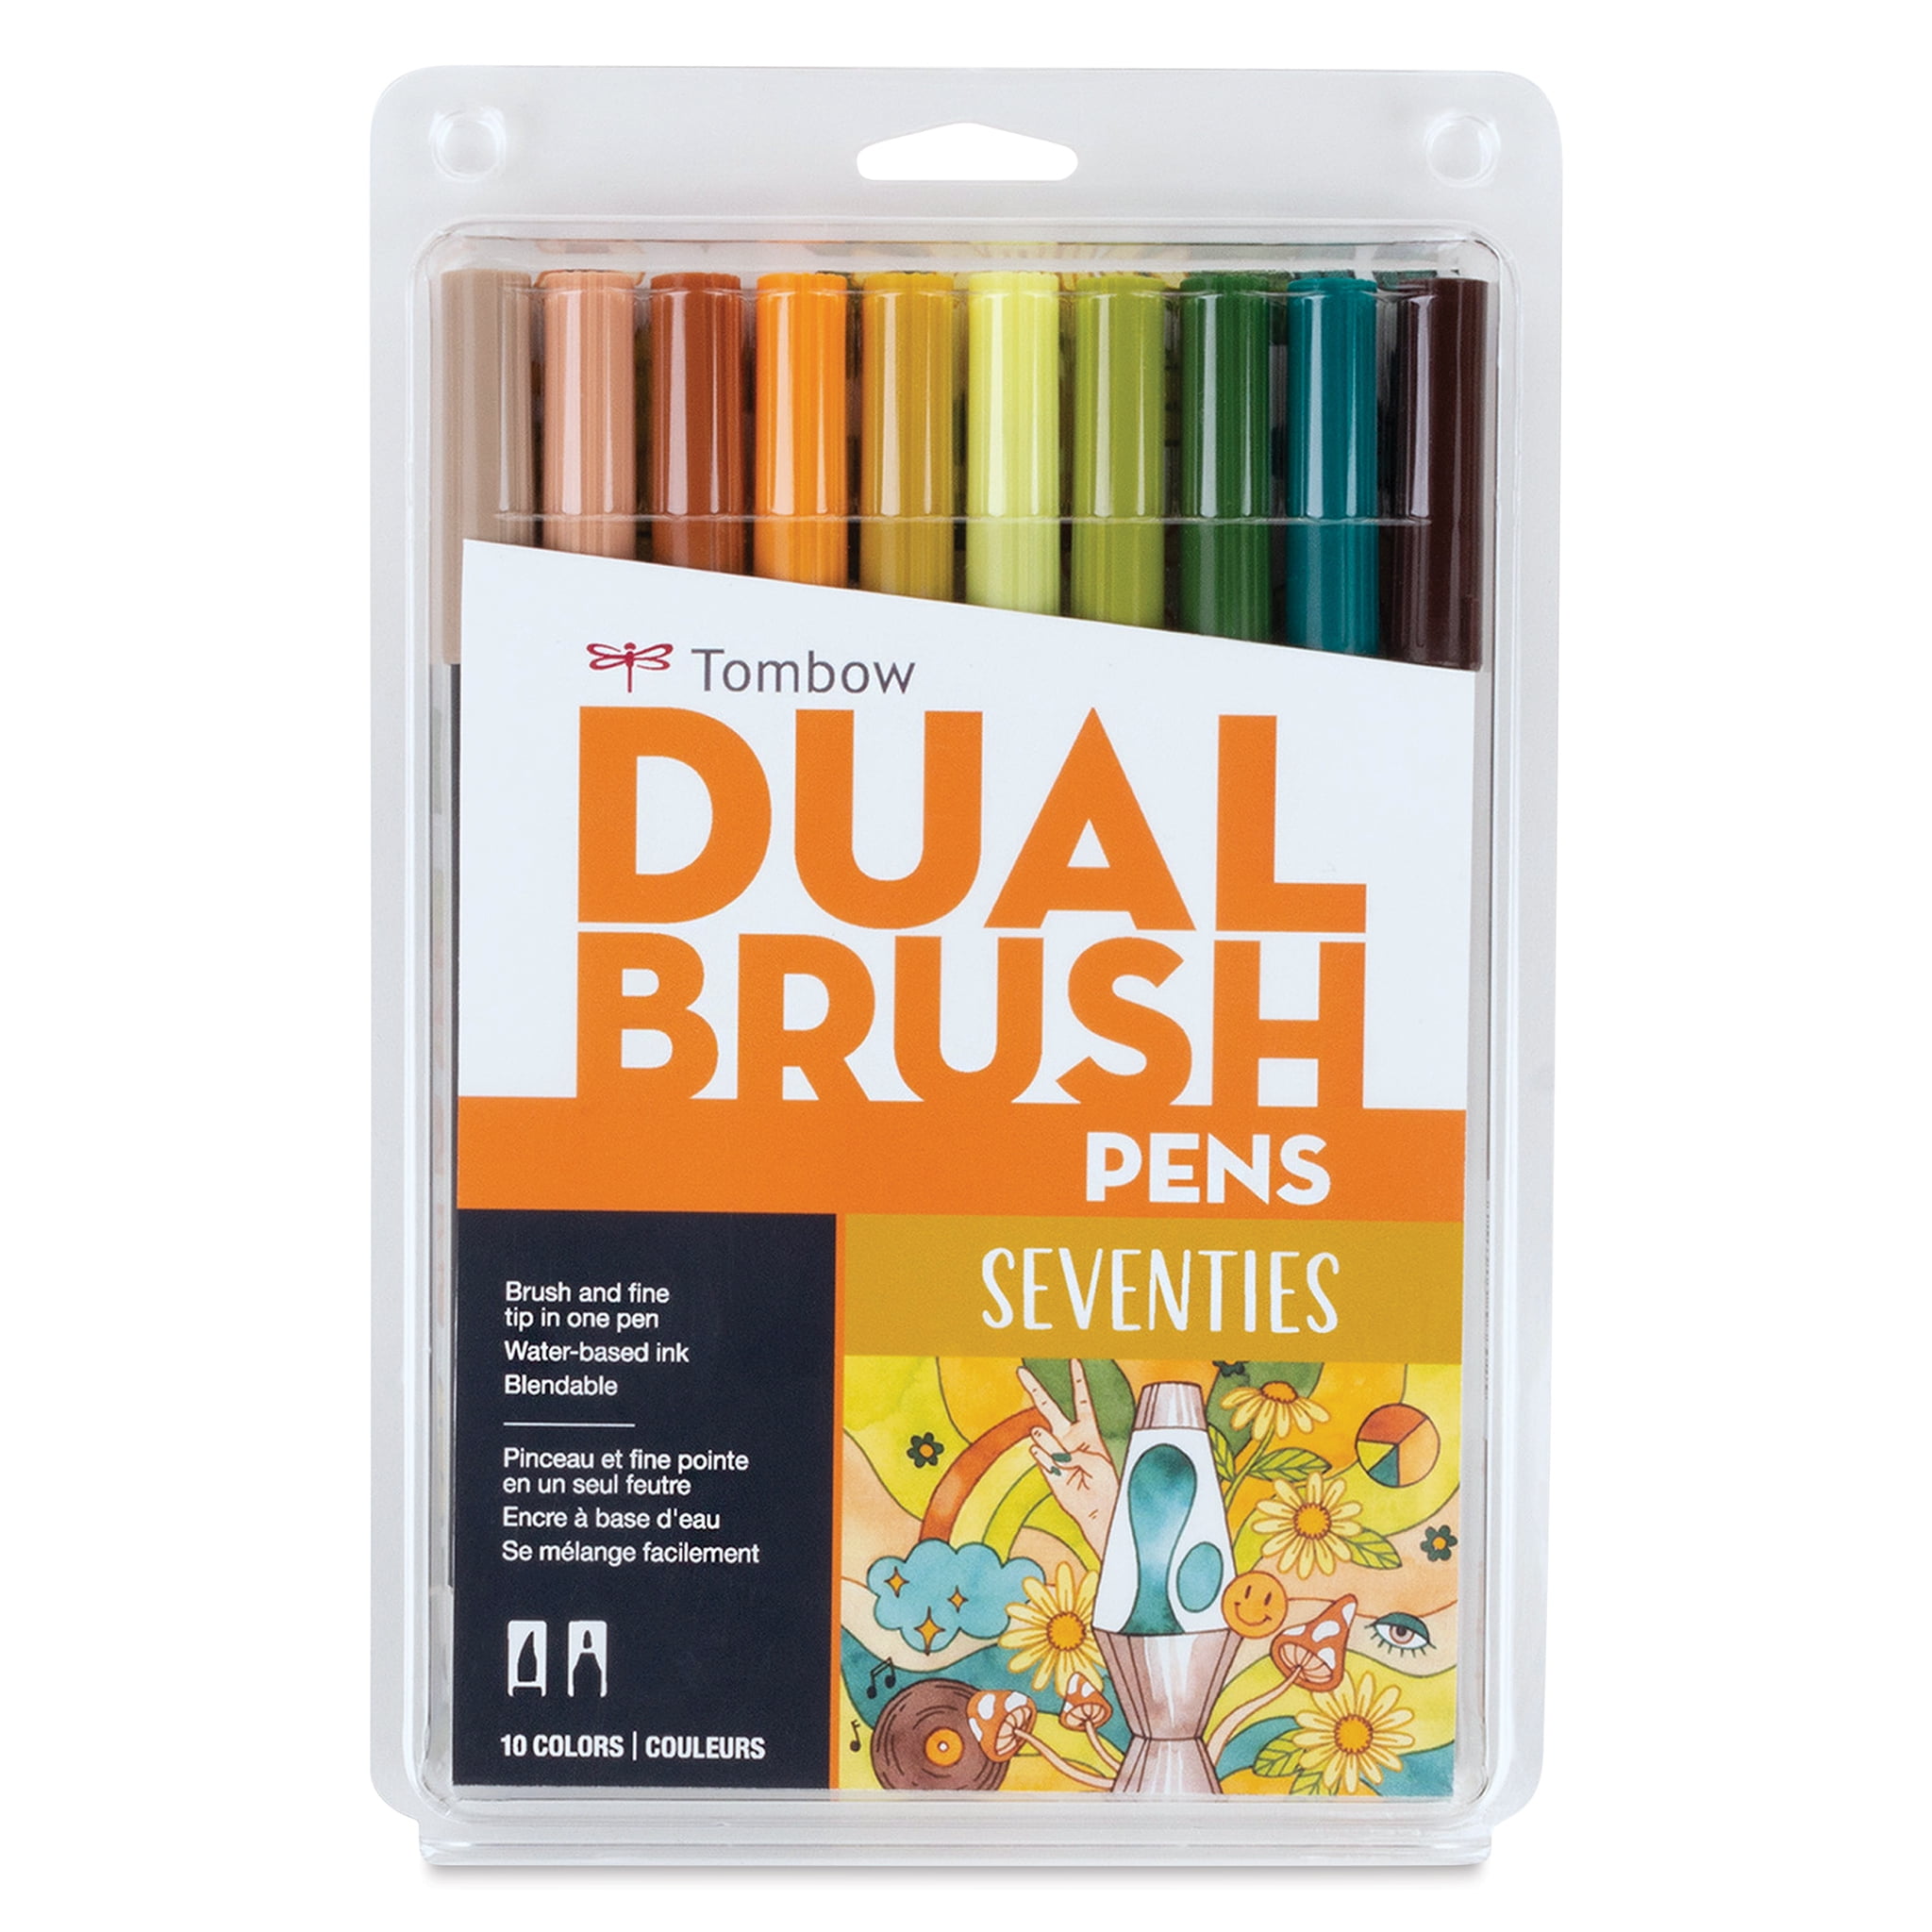 Tombow Dual Brush Pens - Seventies Colors, Set of 10 